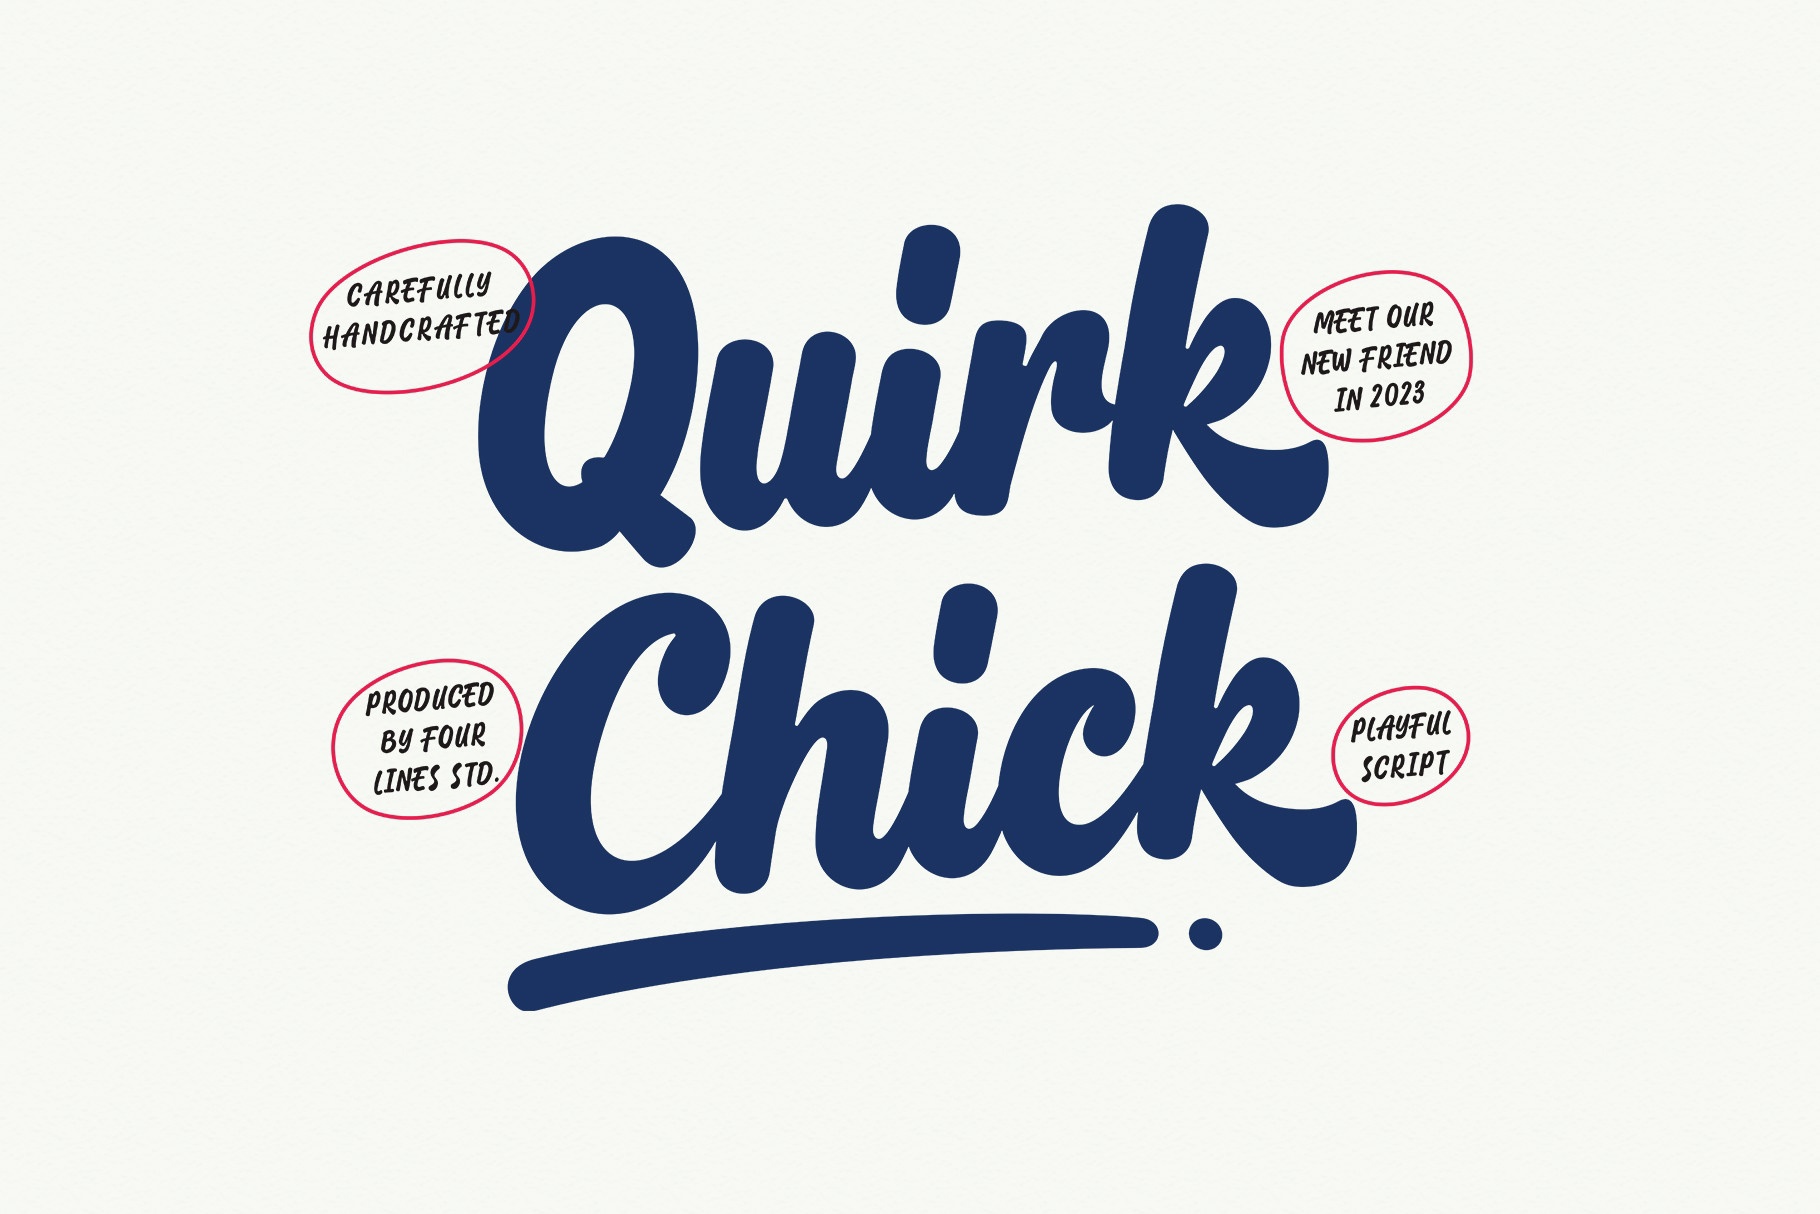 Font Quirk Chick